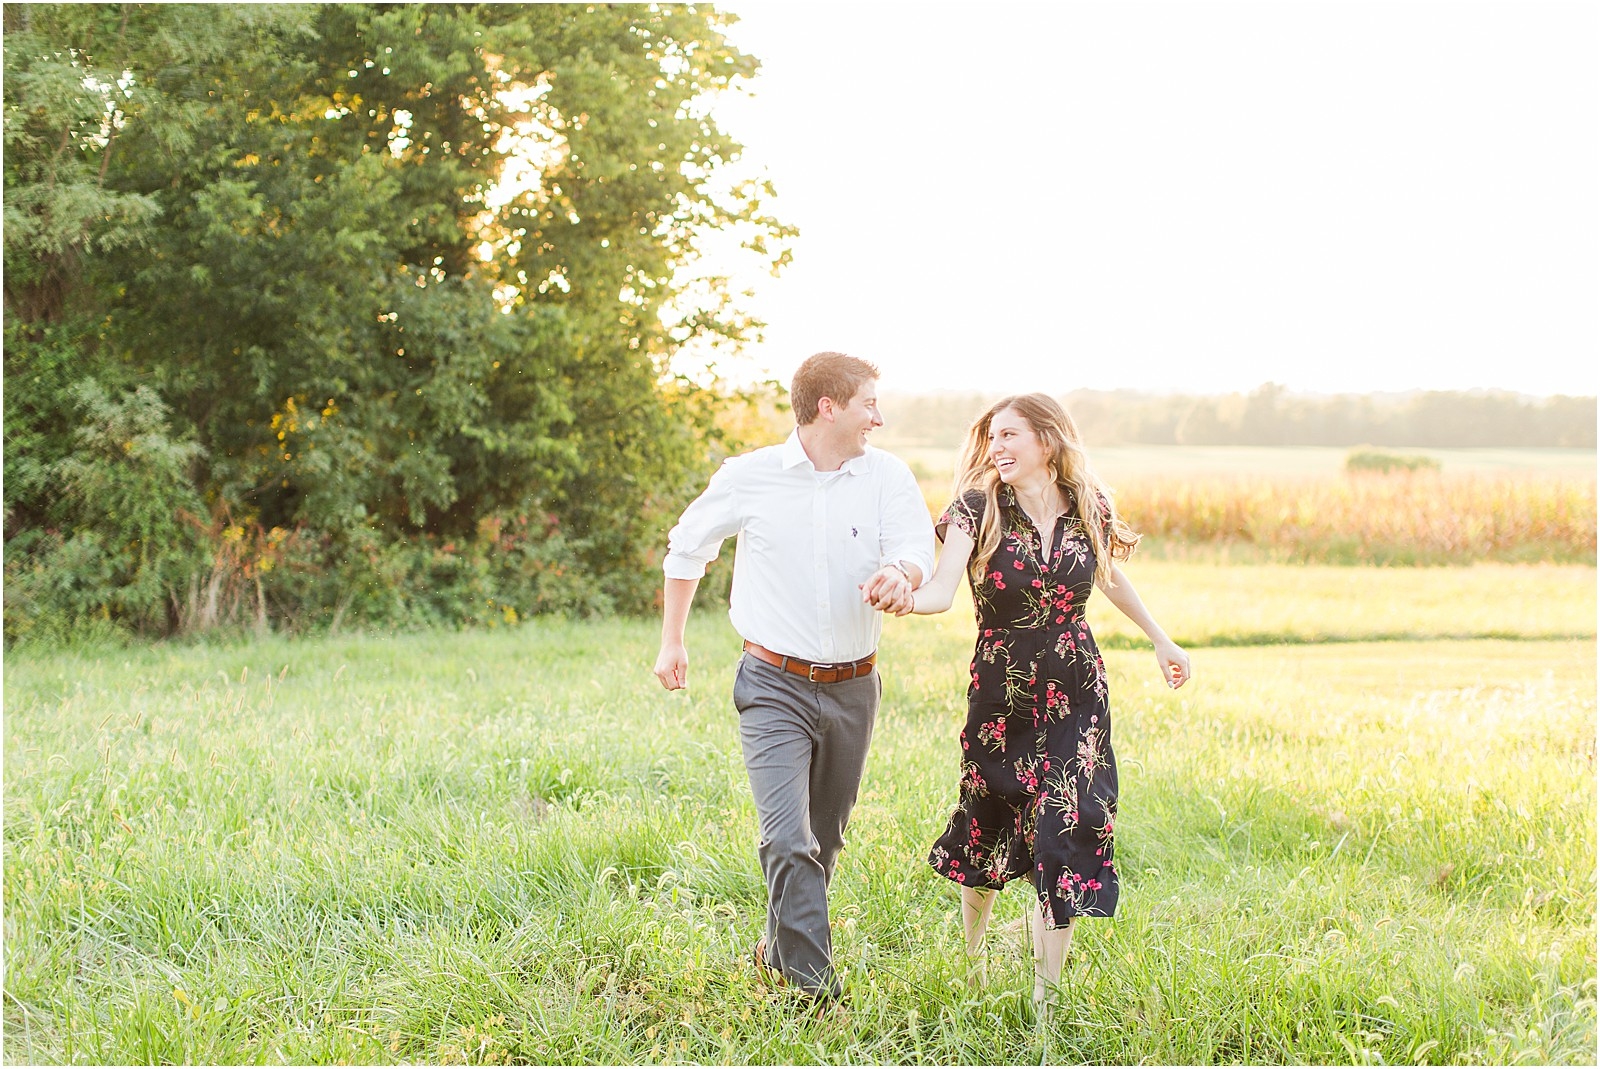 A Jasper Indiana Engagement Session | Tori and Kyle | Bret and Brandie Photography031.jpg